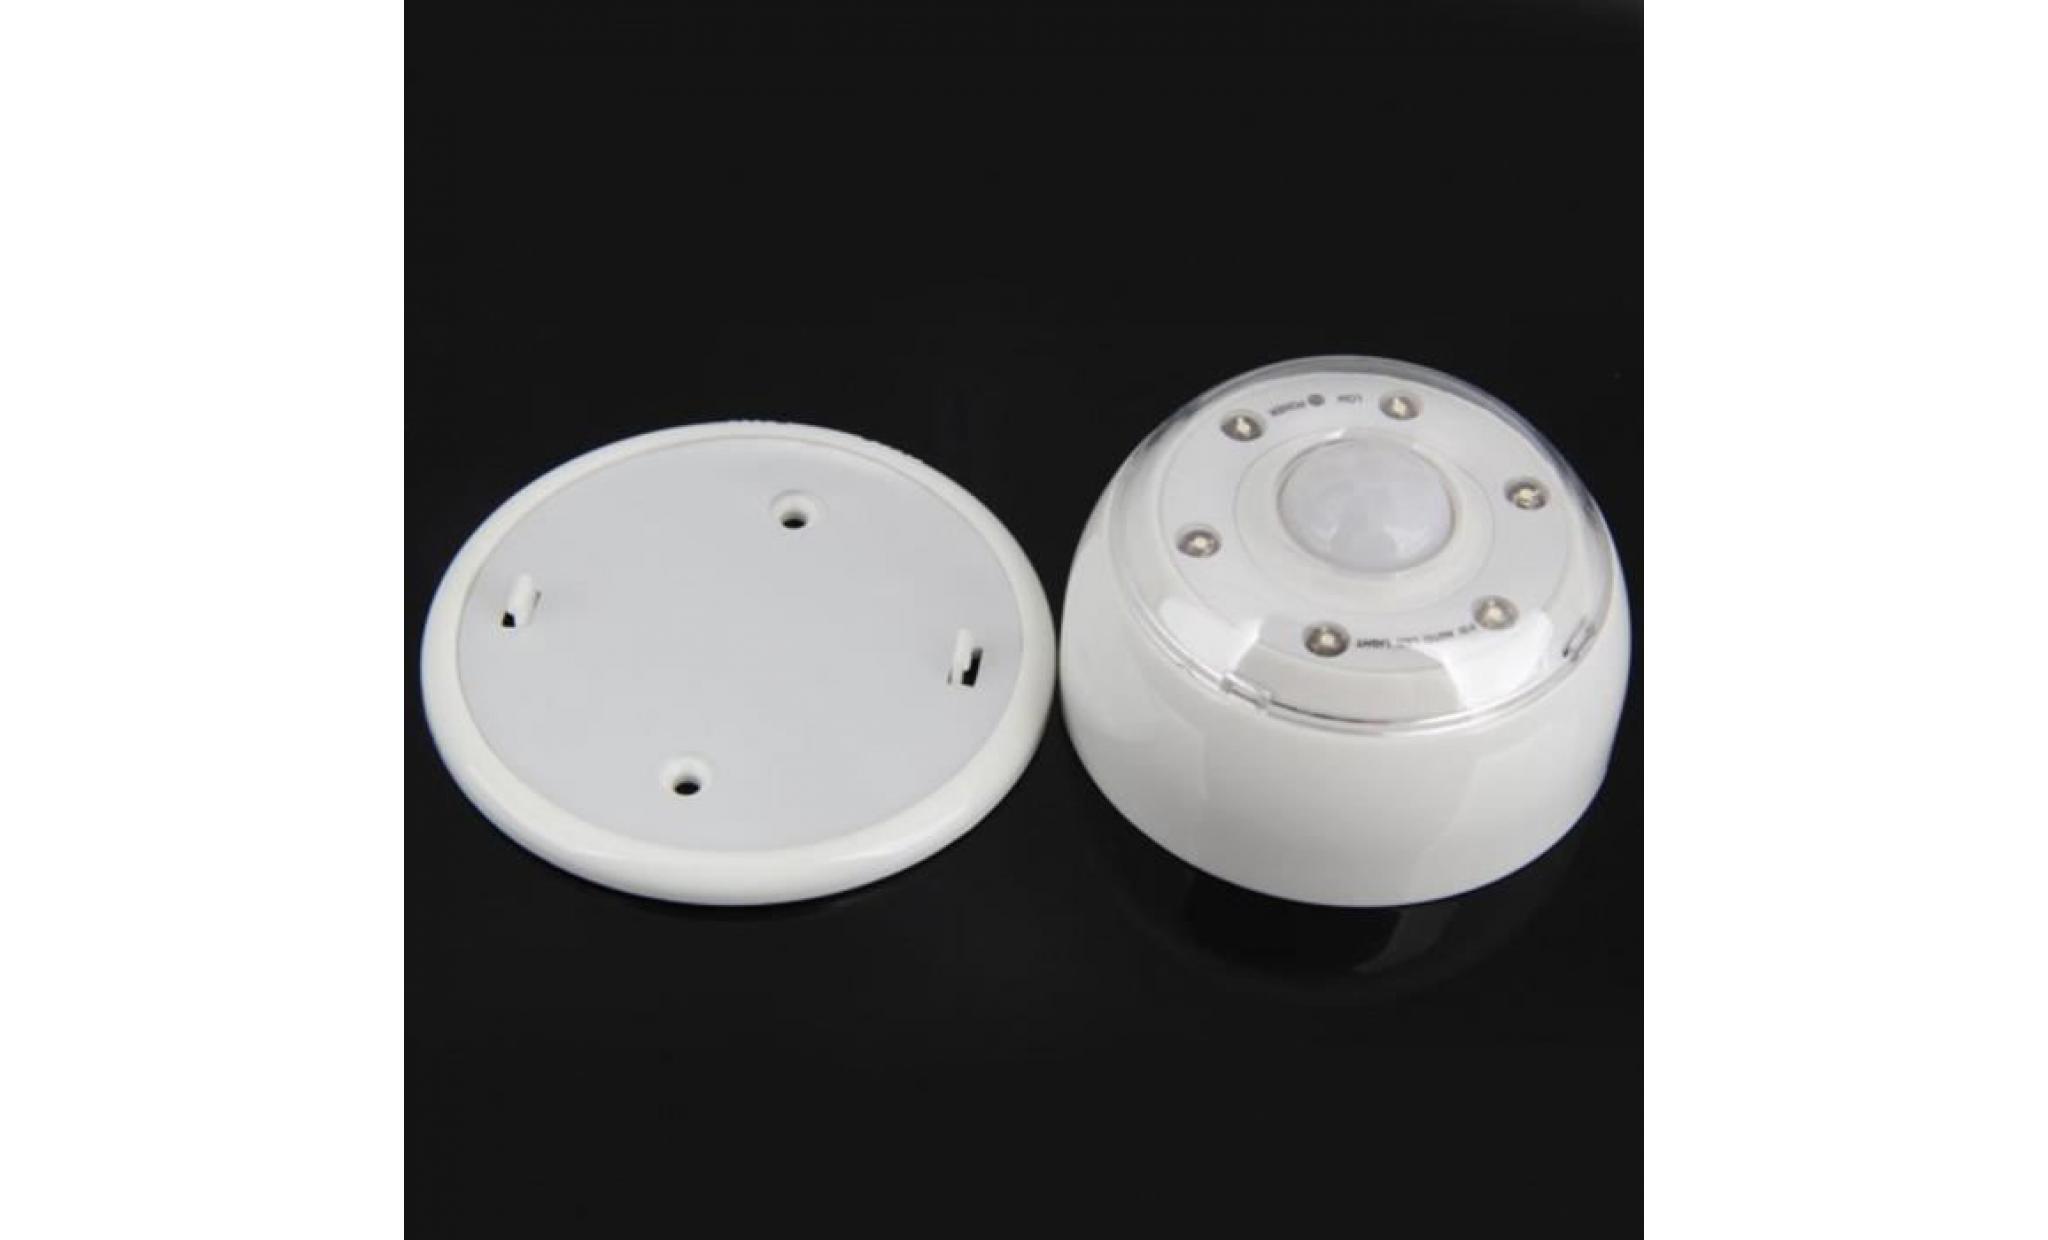 pir auto sensor motion detector lamp 6 leds light wireless infrared home outdoor pageare1050 pageare1050 pas cher